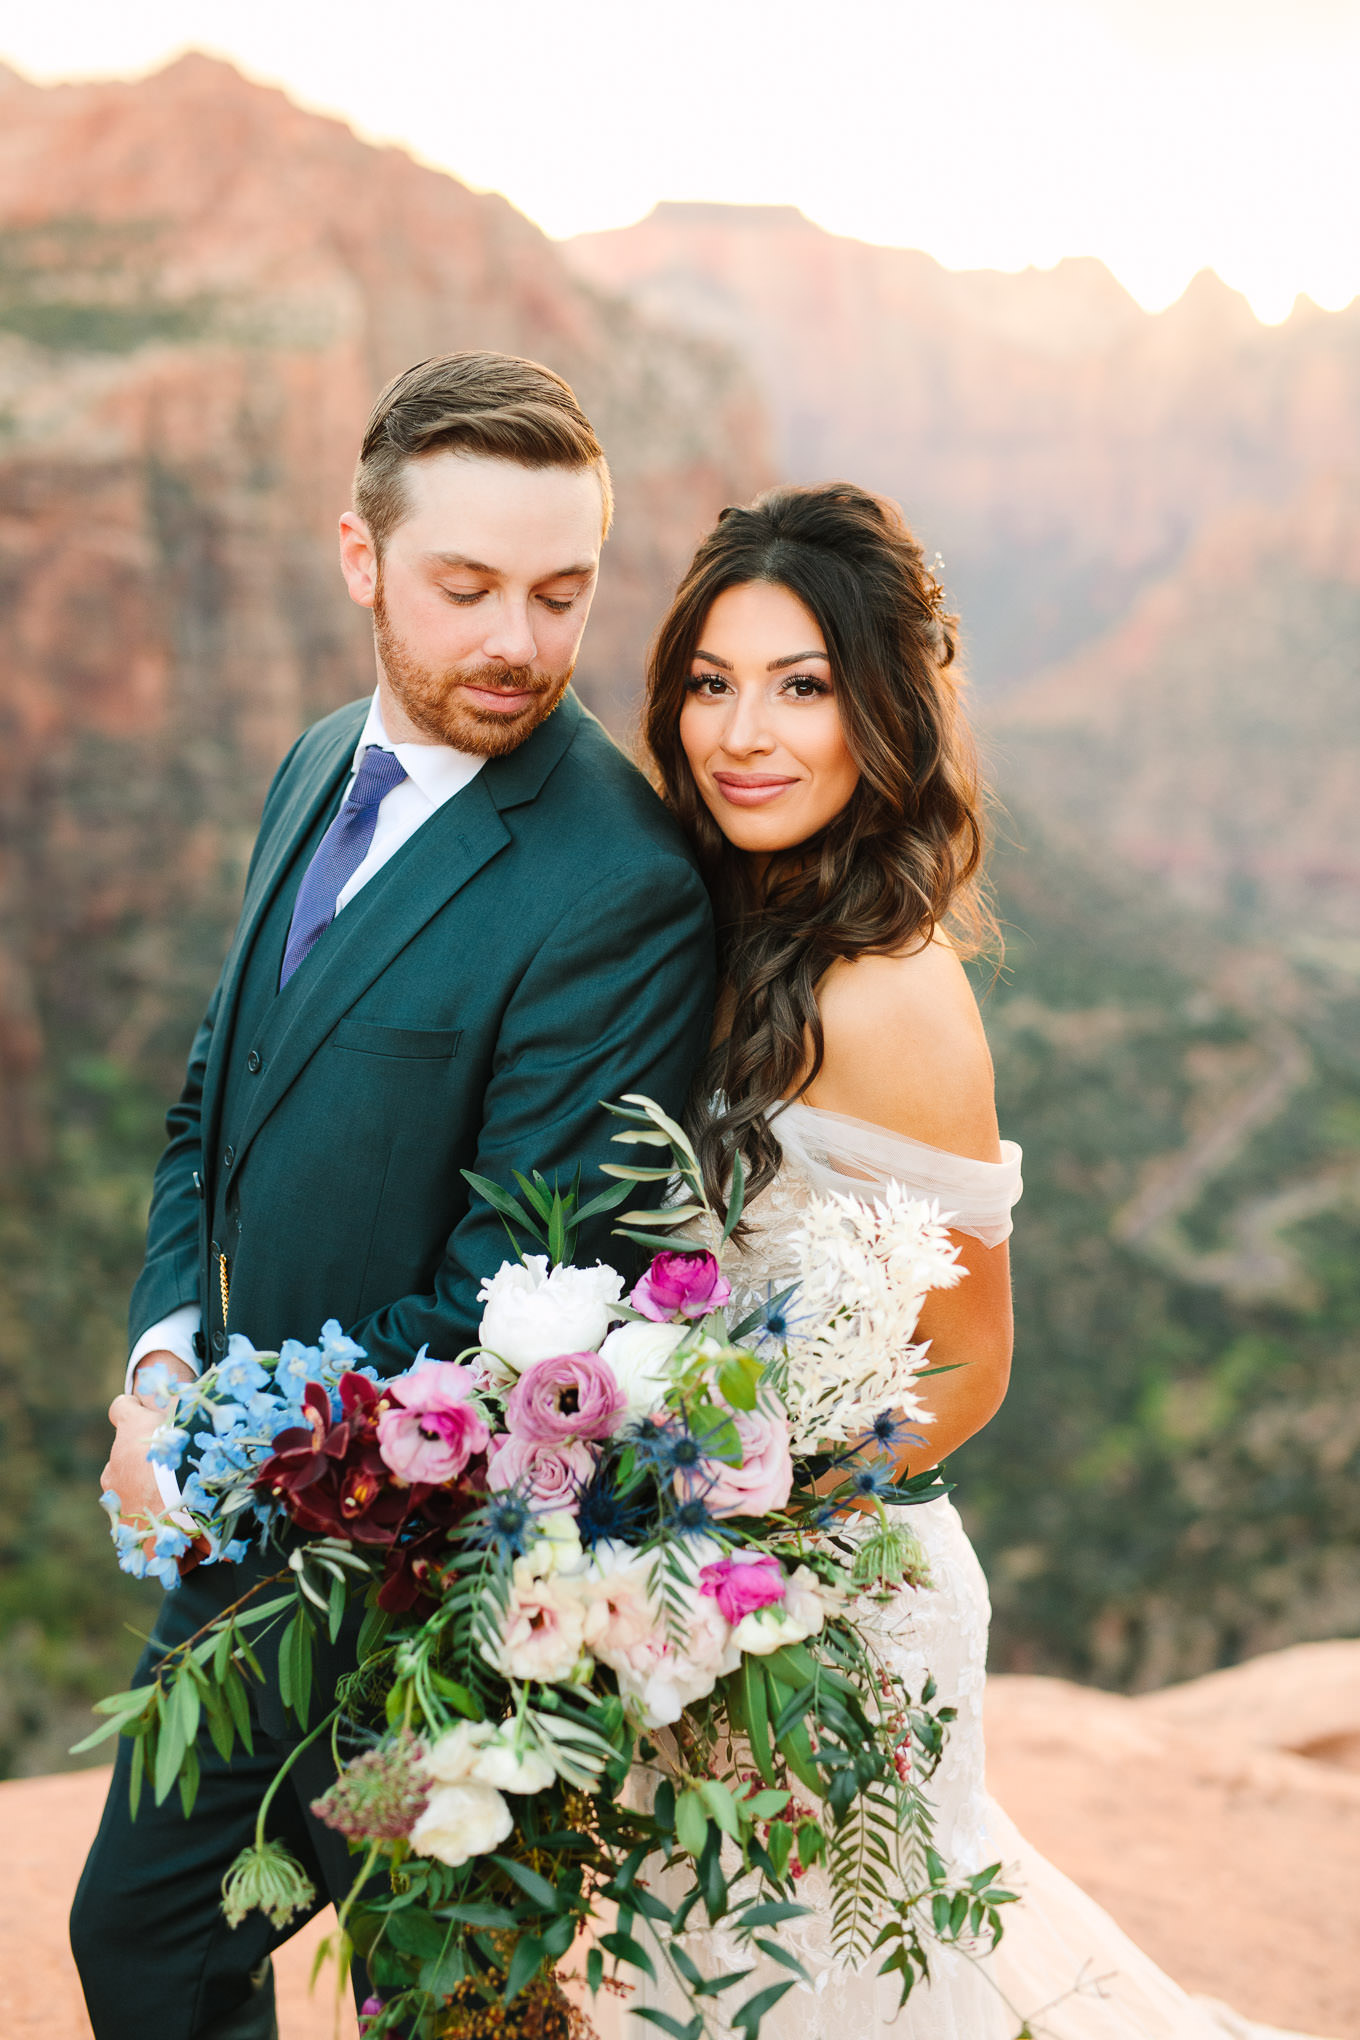 Groom in green suit with colorful bouquet bride | Zion National Park sunset elopement scenic overlook | Colorful adventure elopement photography | #utahelopement #zionelopement #zionwedding #undercanvaszion   Source: Mary Costa Photography | Los Angeles